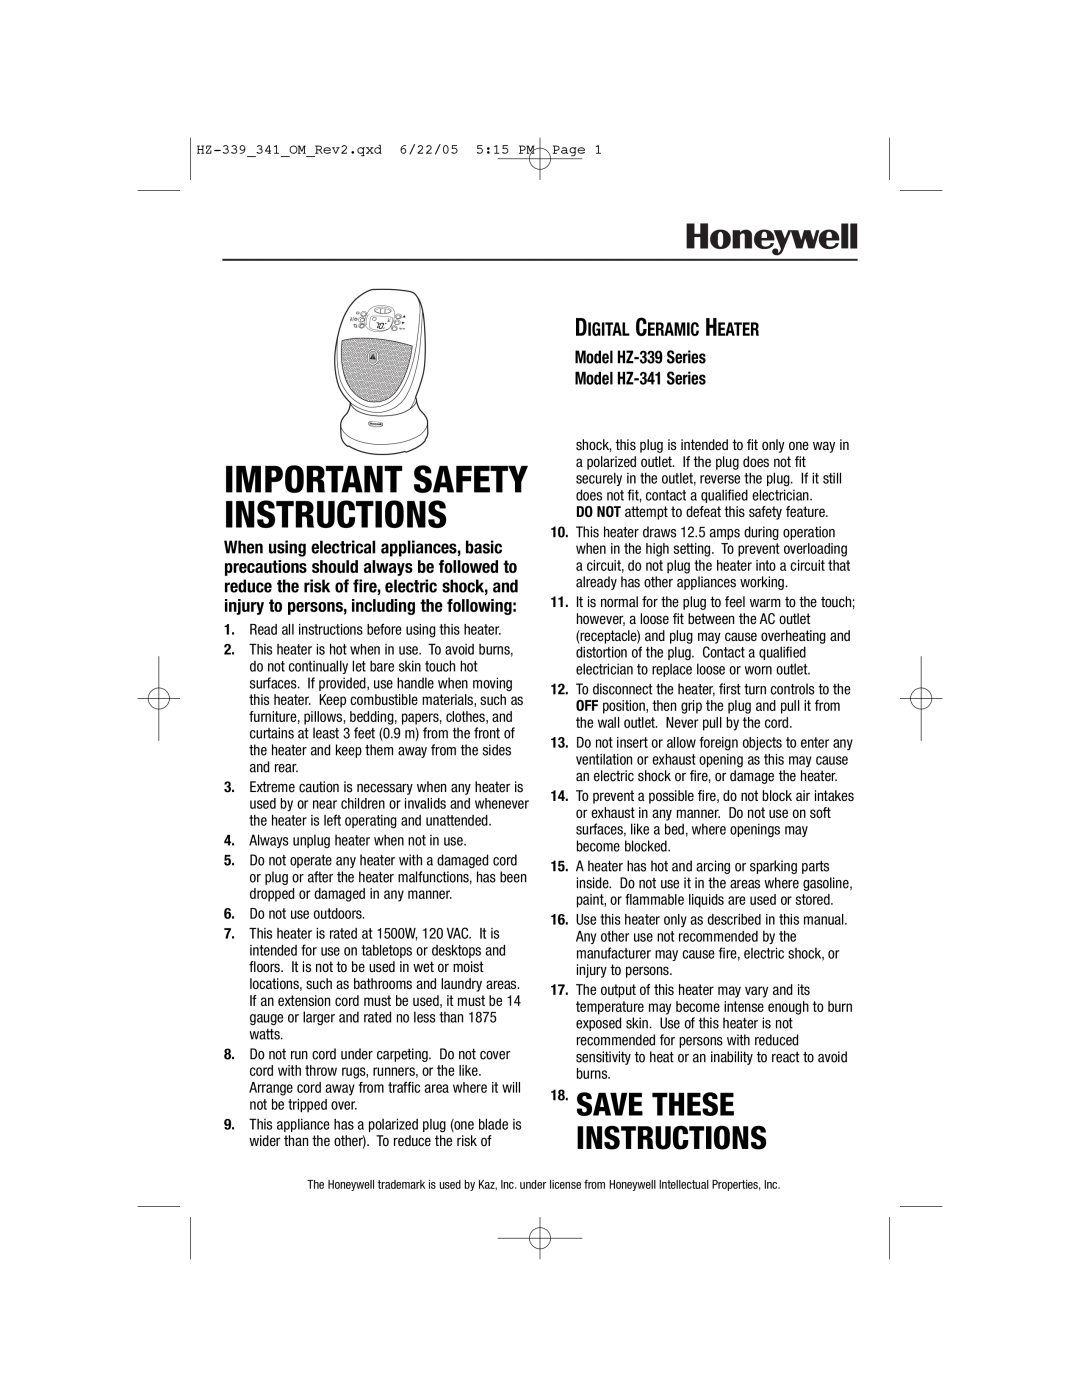 Honeywell HZ-339, HZ-341 important safety instructions Save These Instructions, Digital Ceramic Heater 